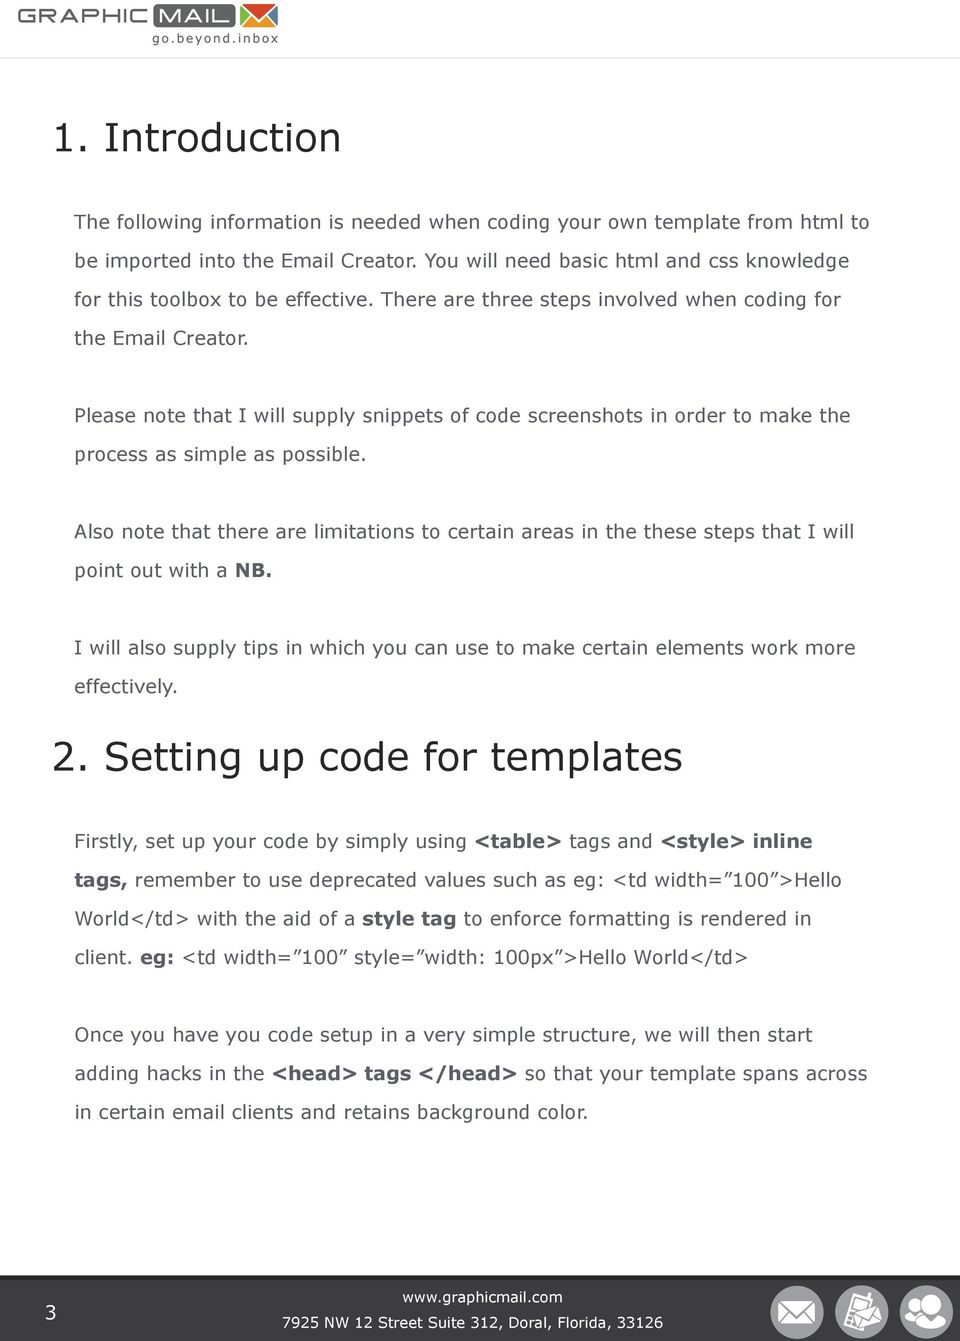 Please note that I will supply snippets of code screenshots in order to make the process as simple as possible.